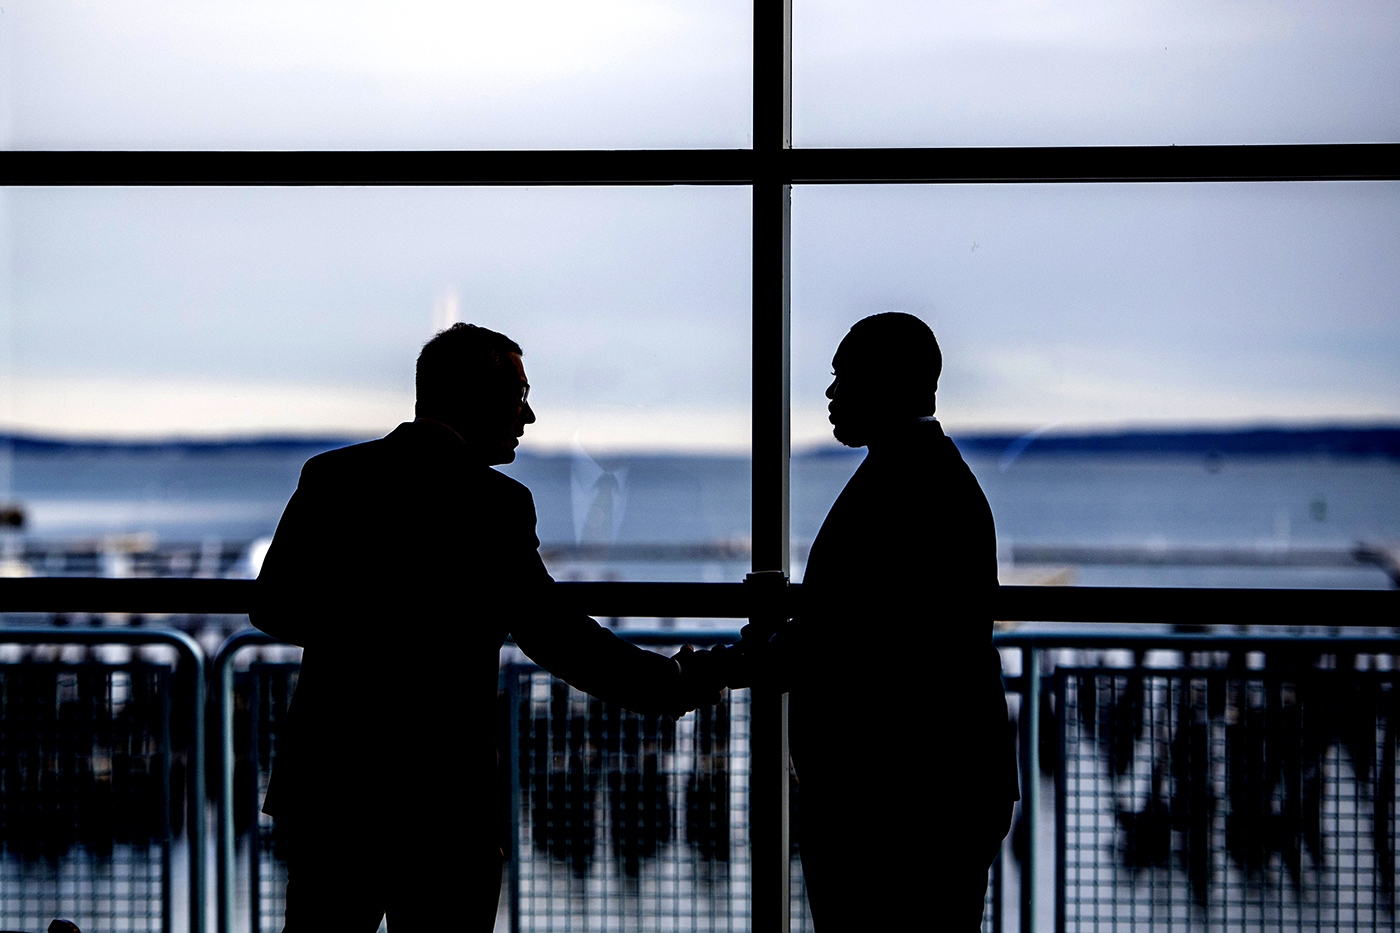 Two people in silhouette shaking hands at an airport